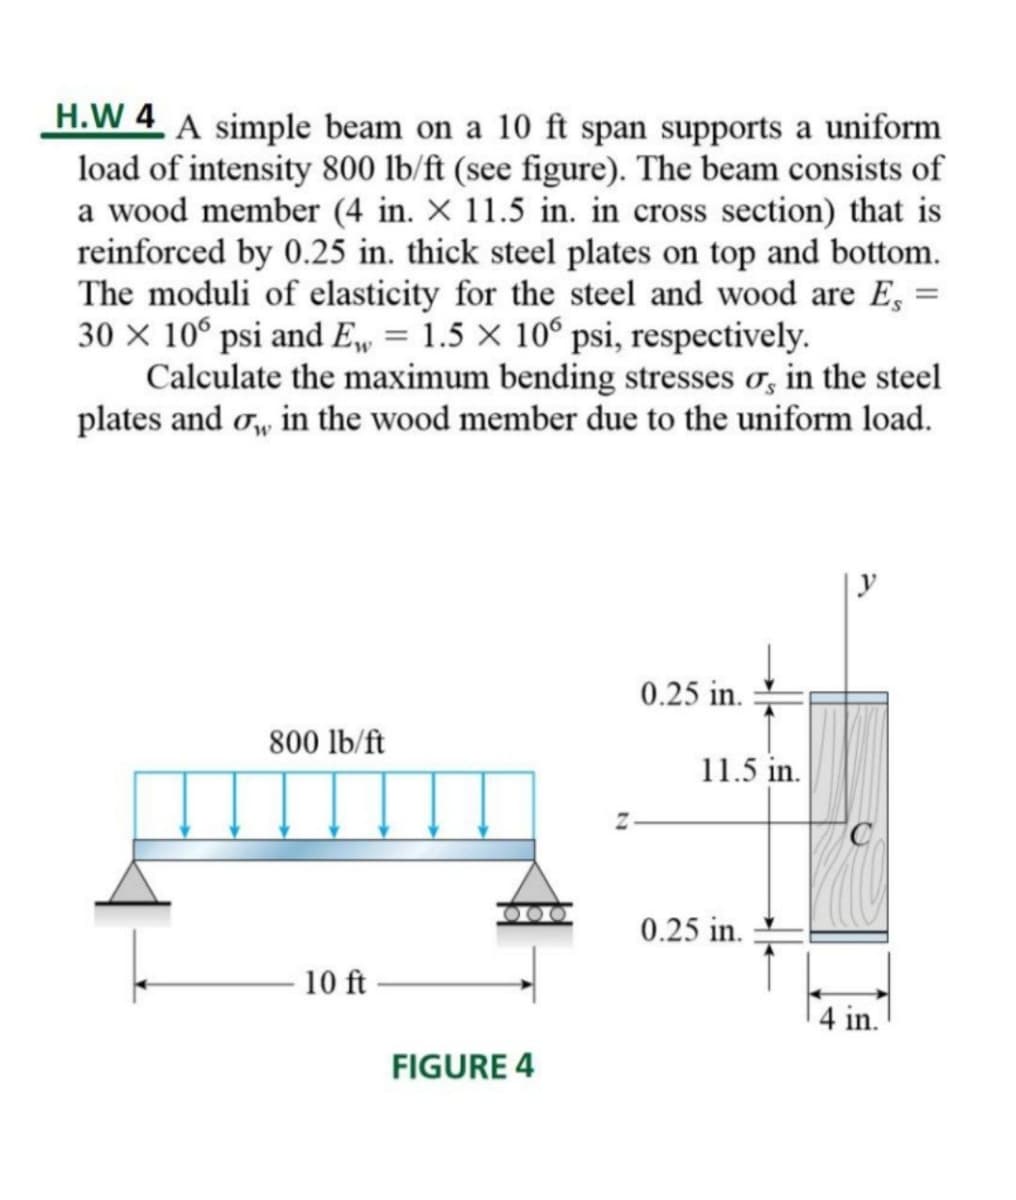 H.W 4 A simple beam on a 10 ft span supports a uniform
load of intensity 800 lb/ft (see figure). The beam consists of
a wood member (4 in. X 11.5 in. in cross section) that is
reinforced by 0.25 in. thick steel plates on top and bottom.
The moduli of elasticity for the steel and wood are E,
30 × 10° psi and E, = 1.5 × 10° psi, respectively.
Calculate the maximum bending stresses o, in the steel
plates and o,, in the wood member due to the uniform load.
y
0.25 in.
800 lb/ft
11.5 in.
0.25 in.
10 ft
4 in.
FIGURE 4
